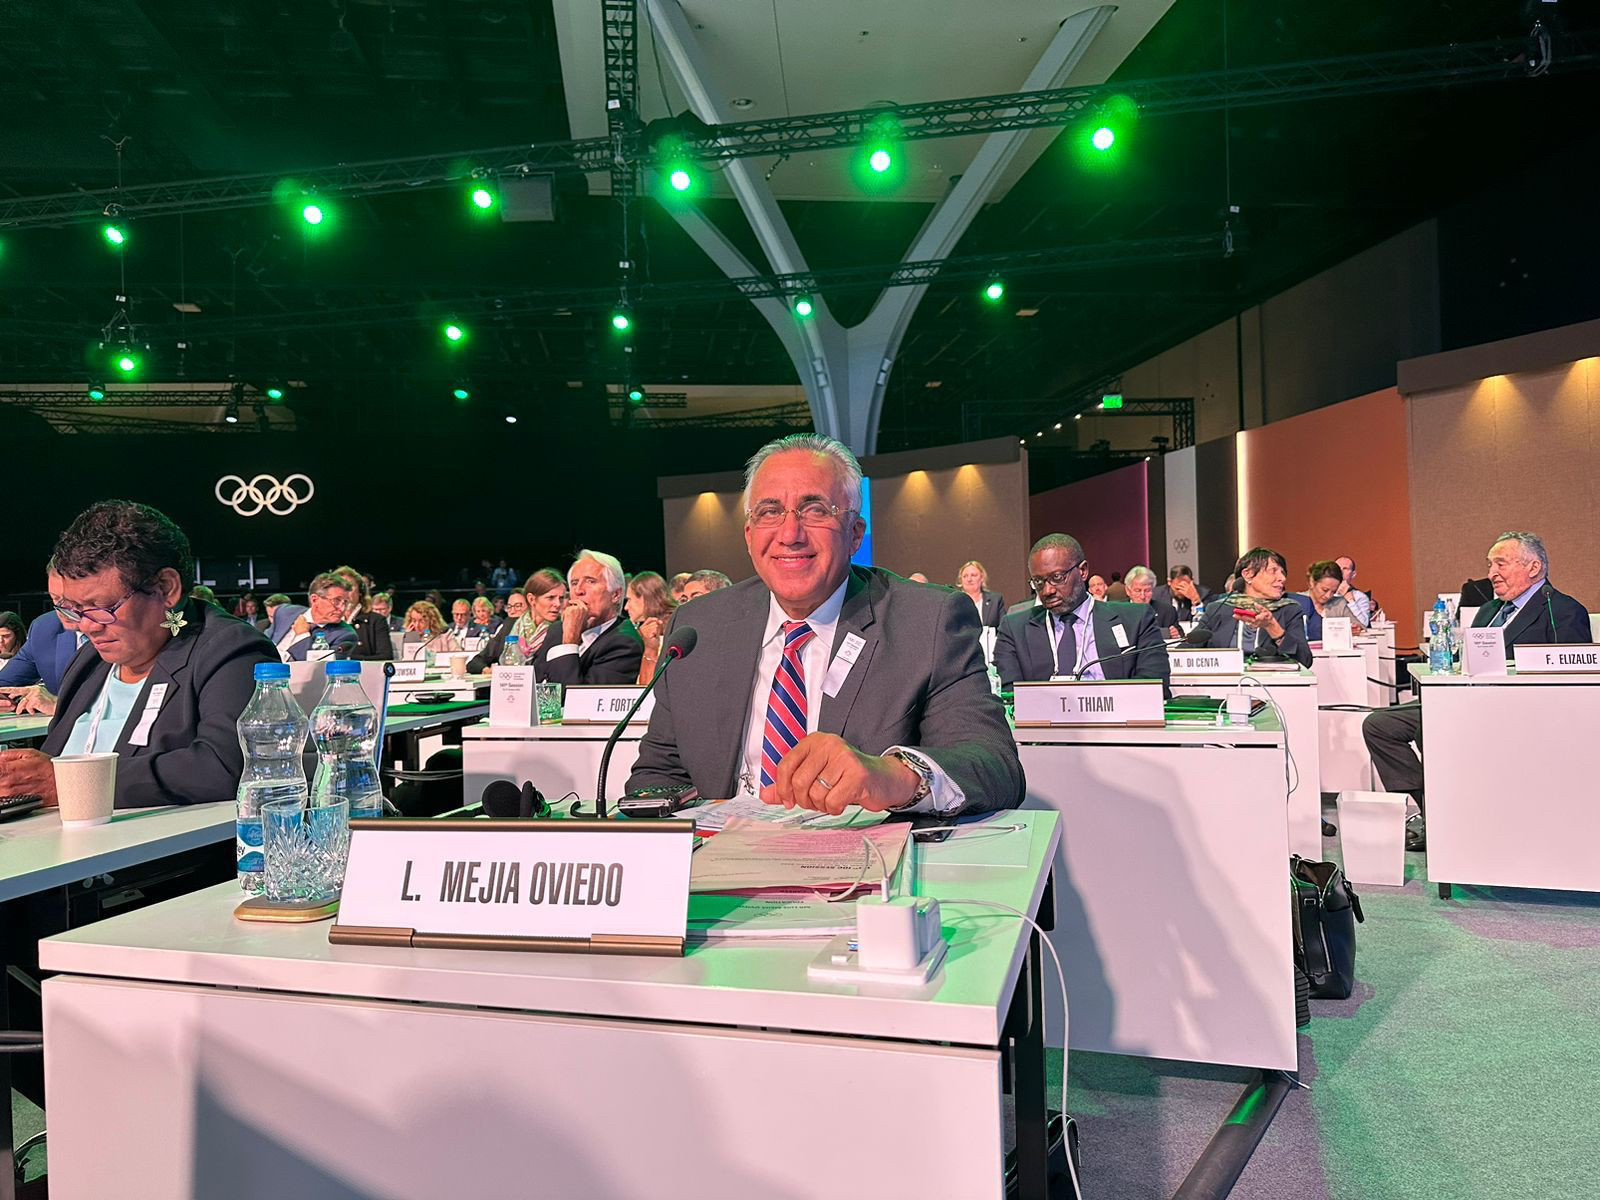 Dominican Republic's Luis Mejía Oviedo was among the IOC members who called for an Olympic Charter amendment on Presidential term limits ©Luis Mejía Oviedo